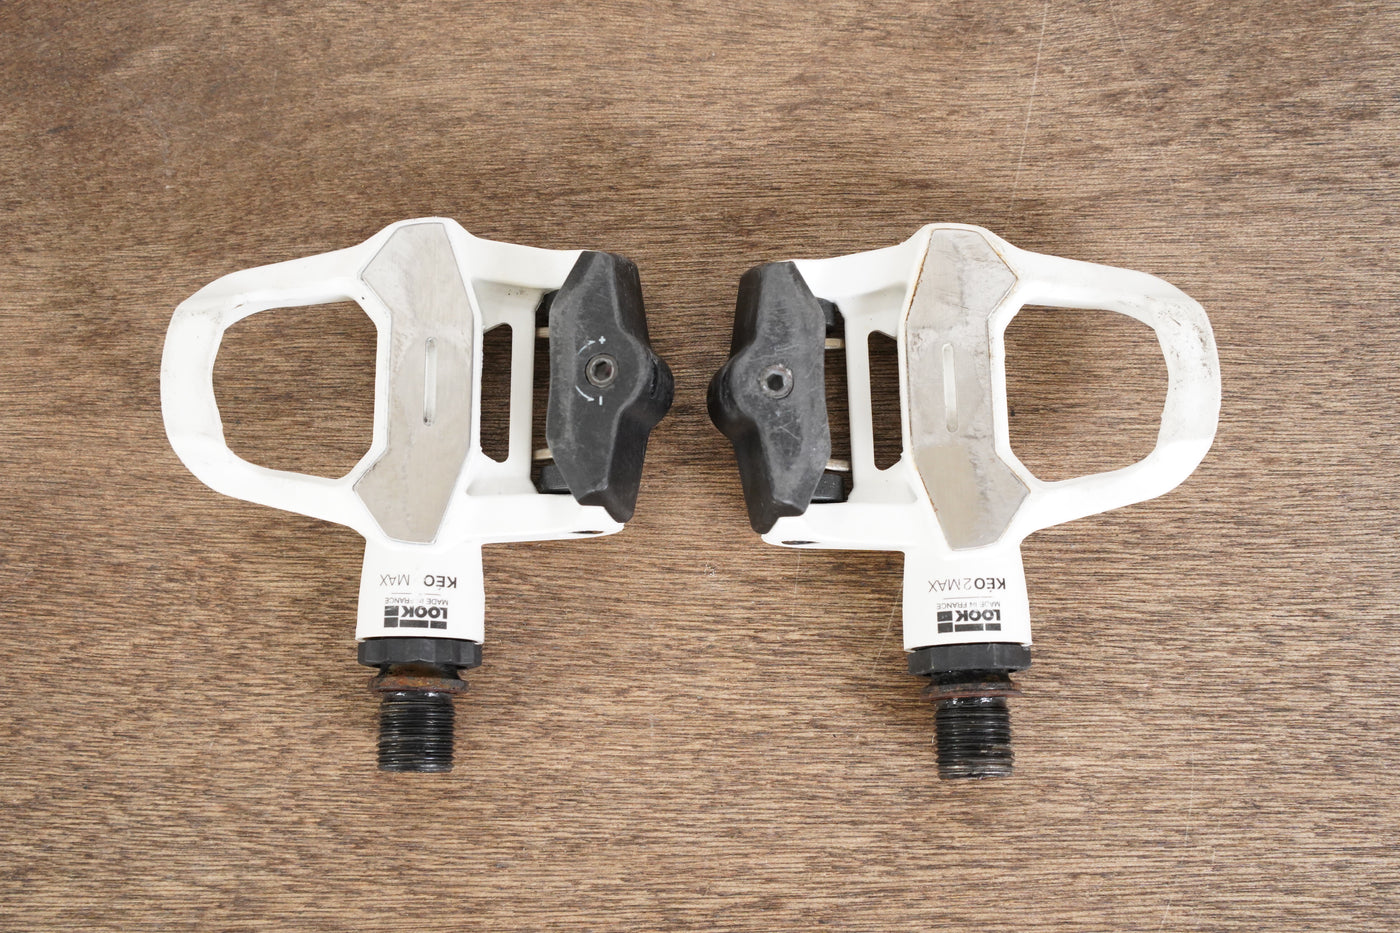 LOOK Keo 2 MAX Composite Road Clipless Pedals 261g